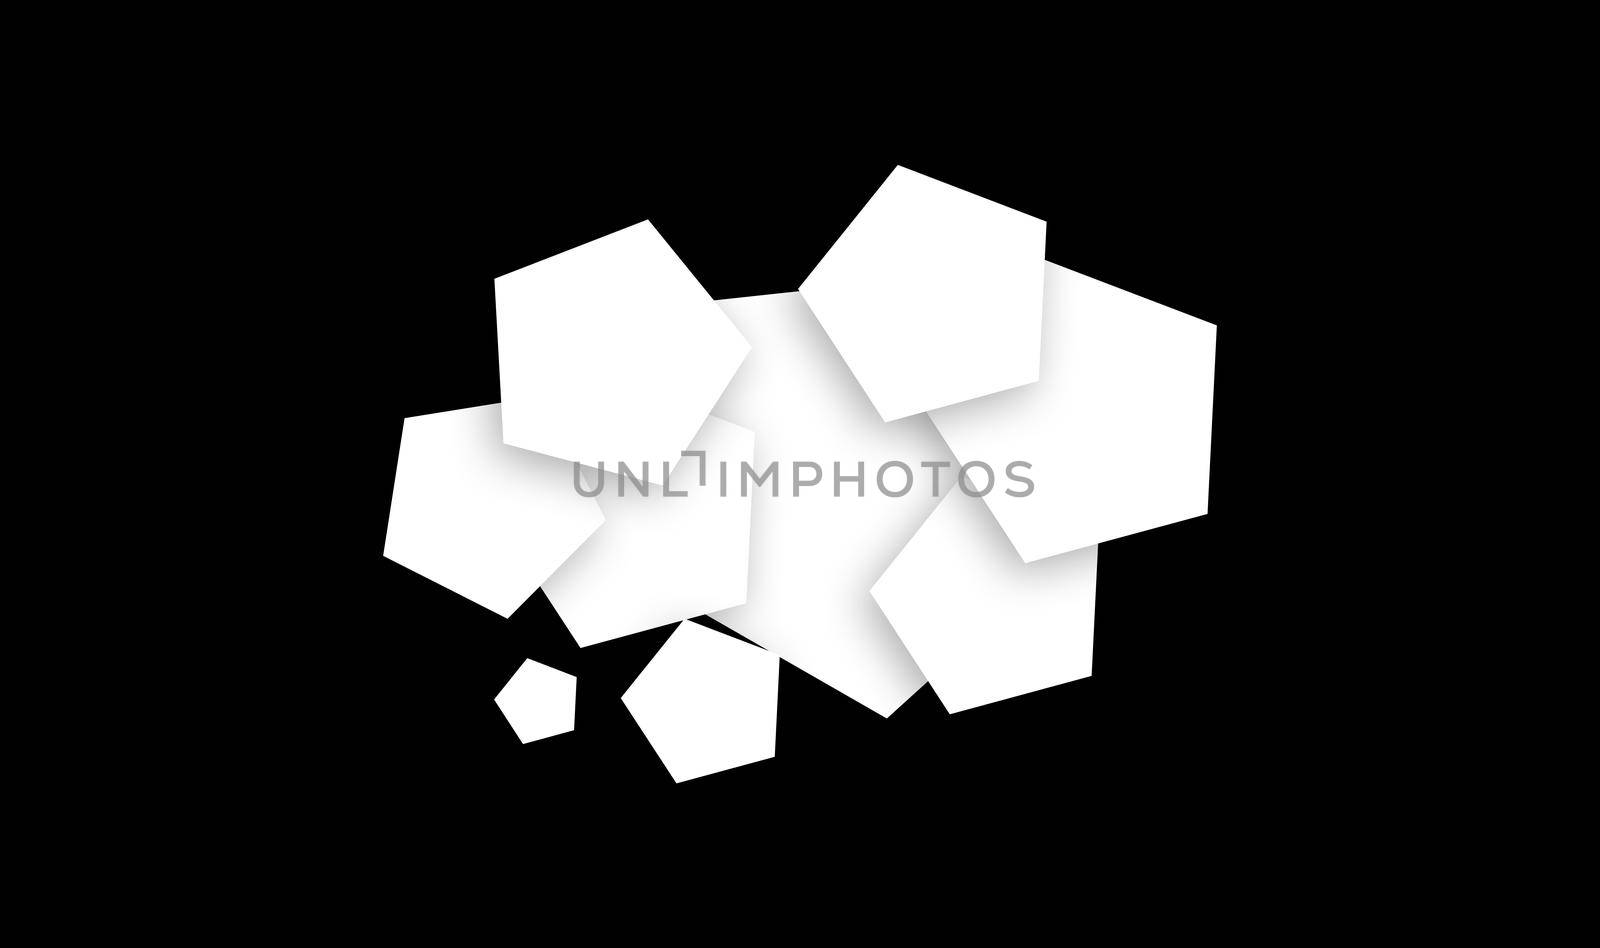 cloud concept design made of pentagon creating a design by overlapping on each other in black isolated background with soft shadow, layered image ready to print for cards, invitation, design print